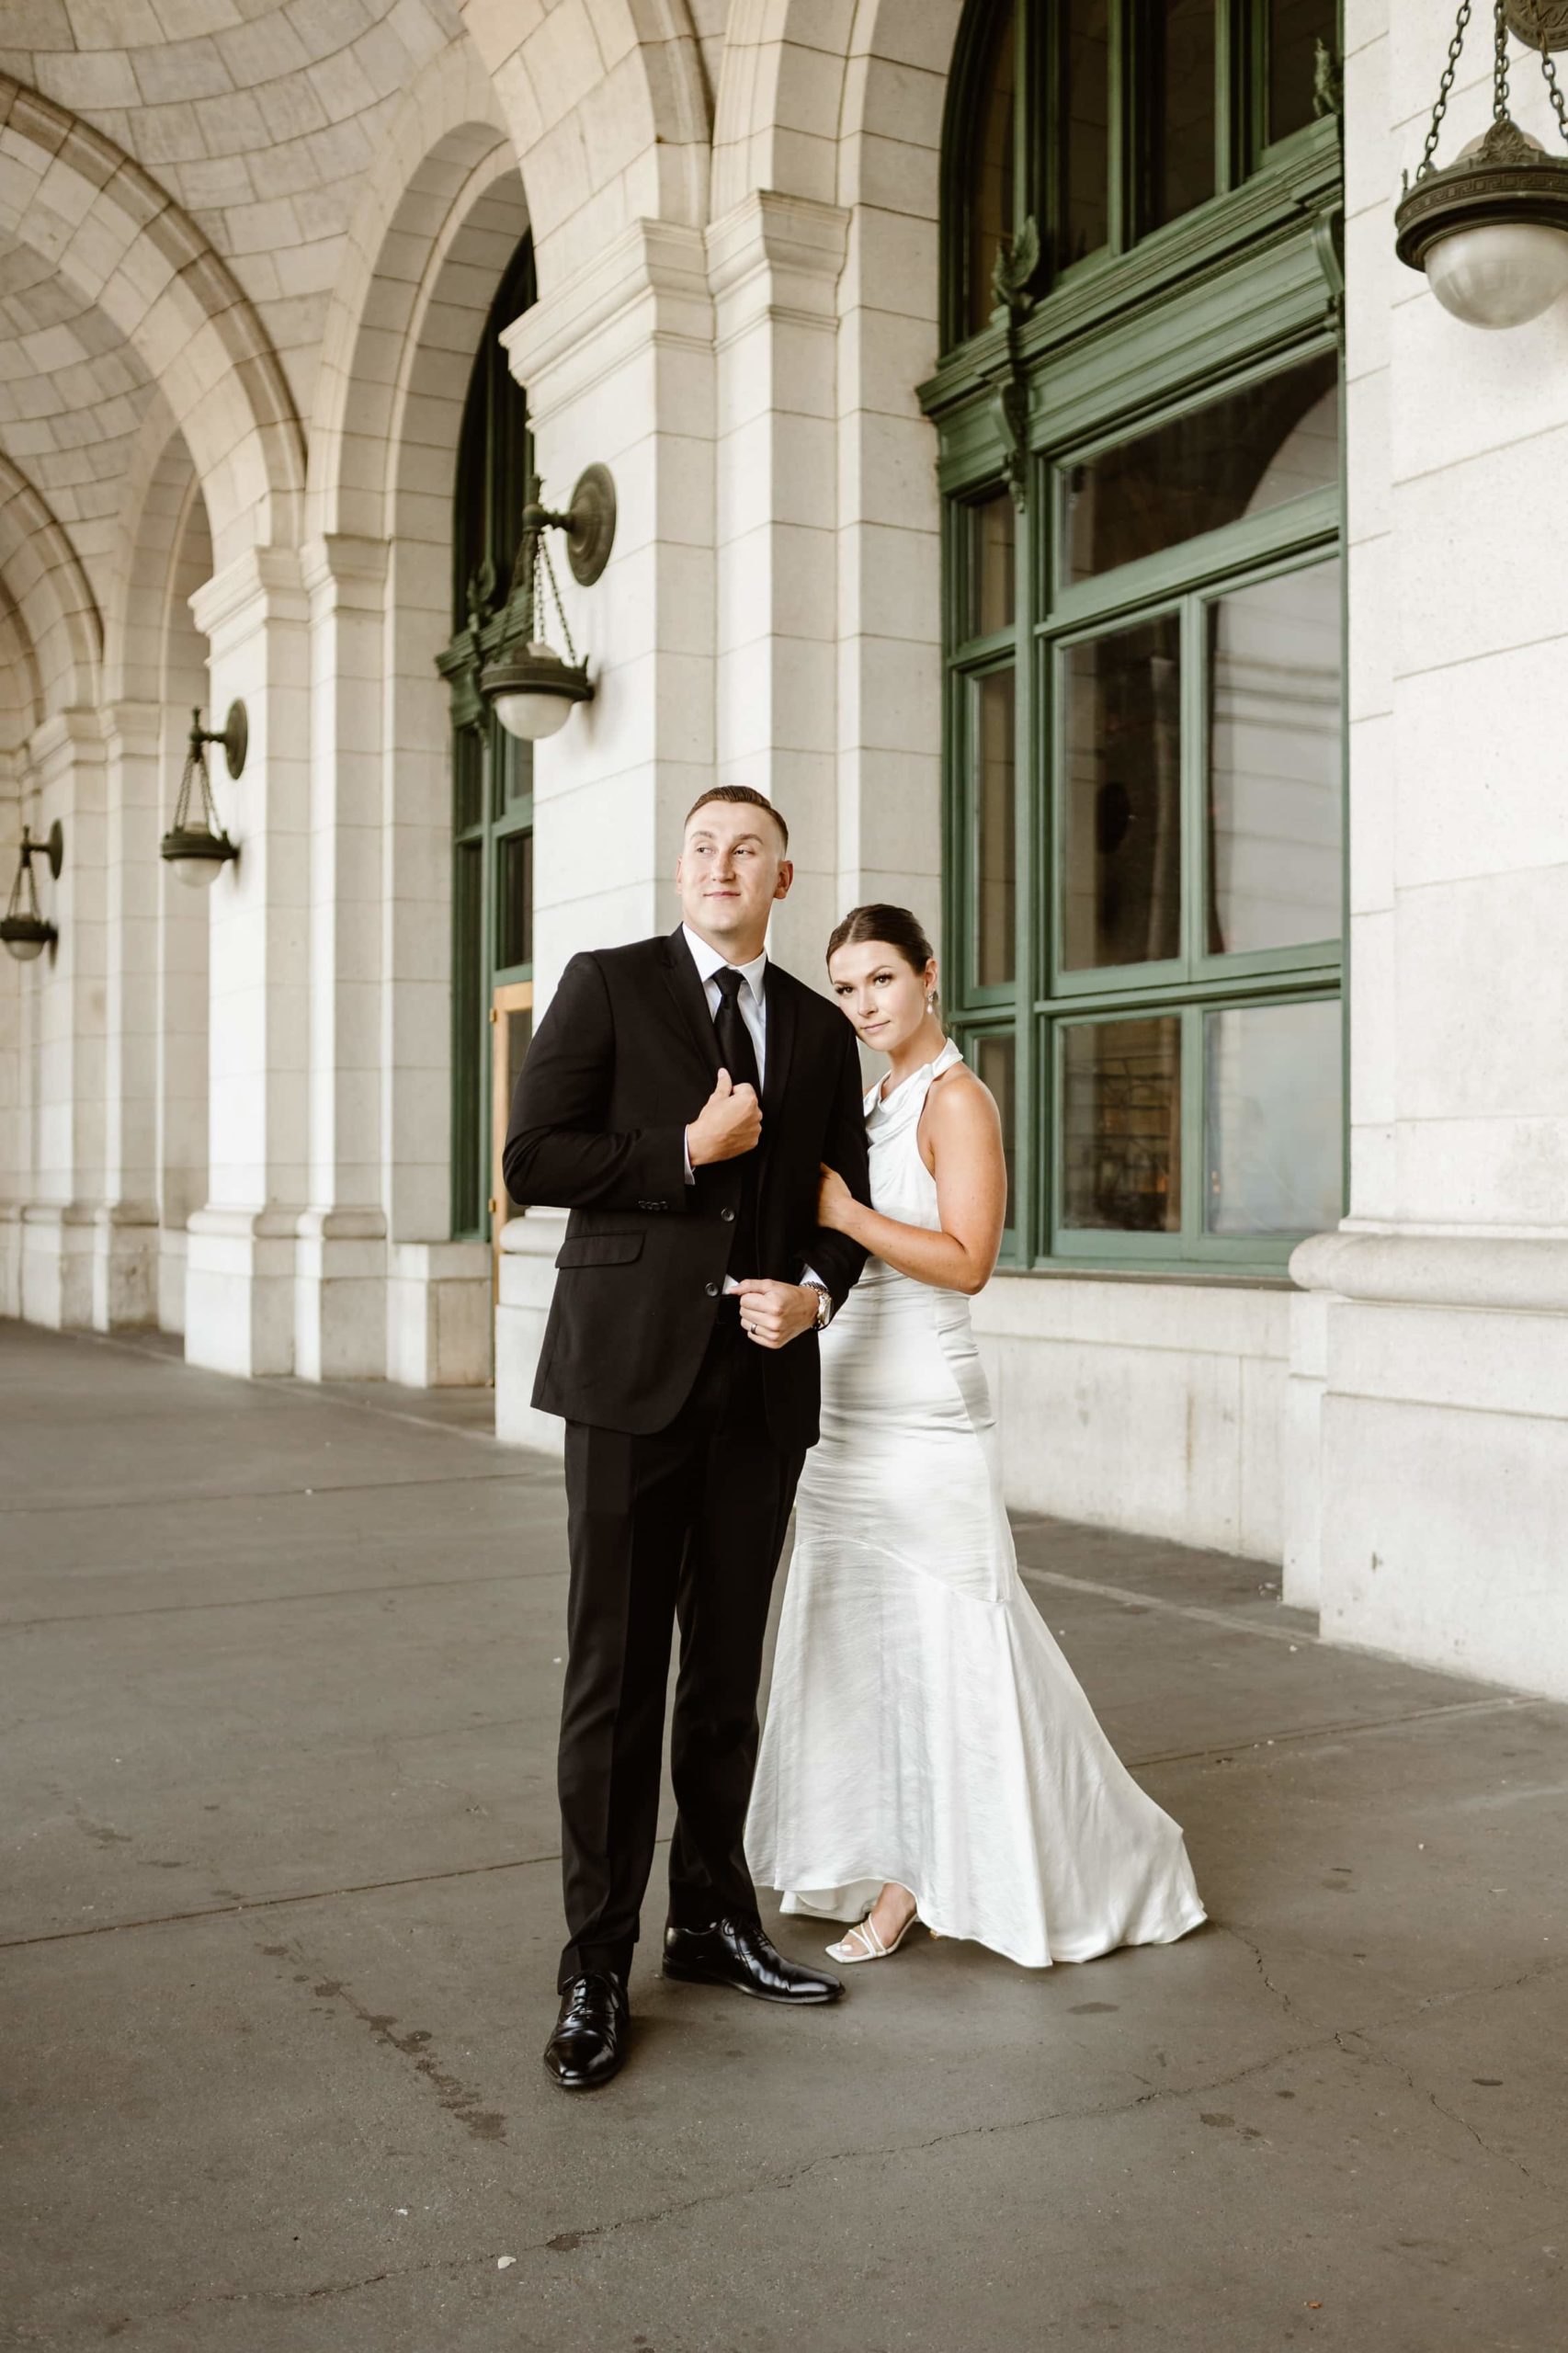 Bride hugs groom's arm under the Union Station arches in Washington DC